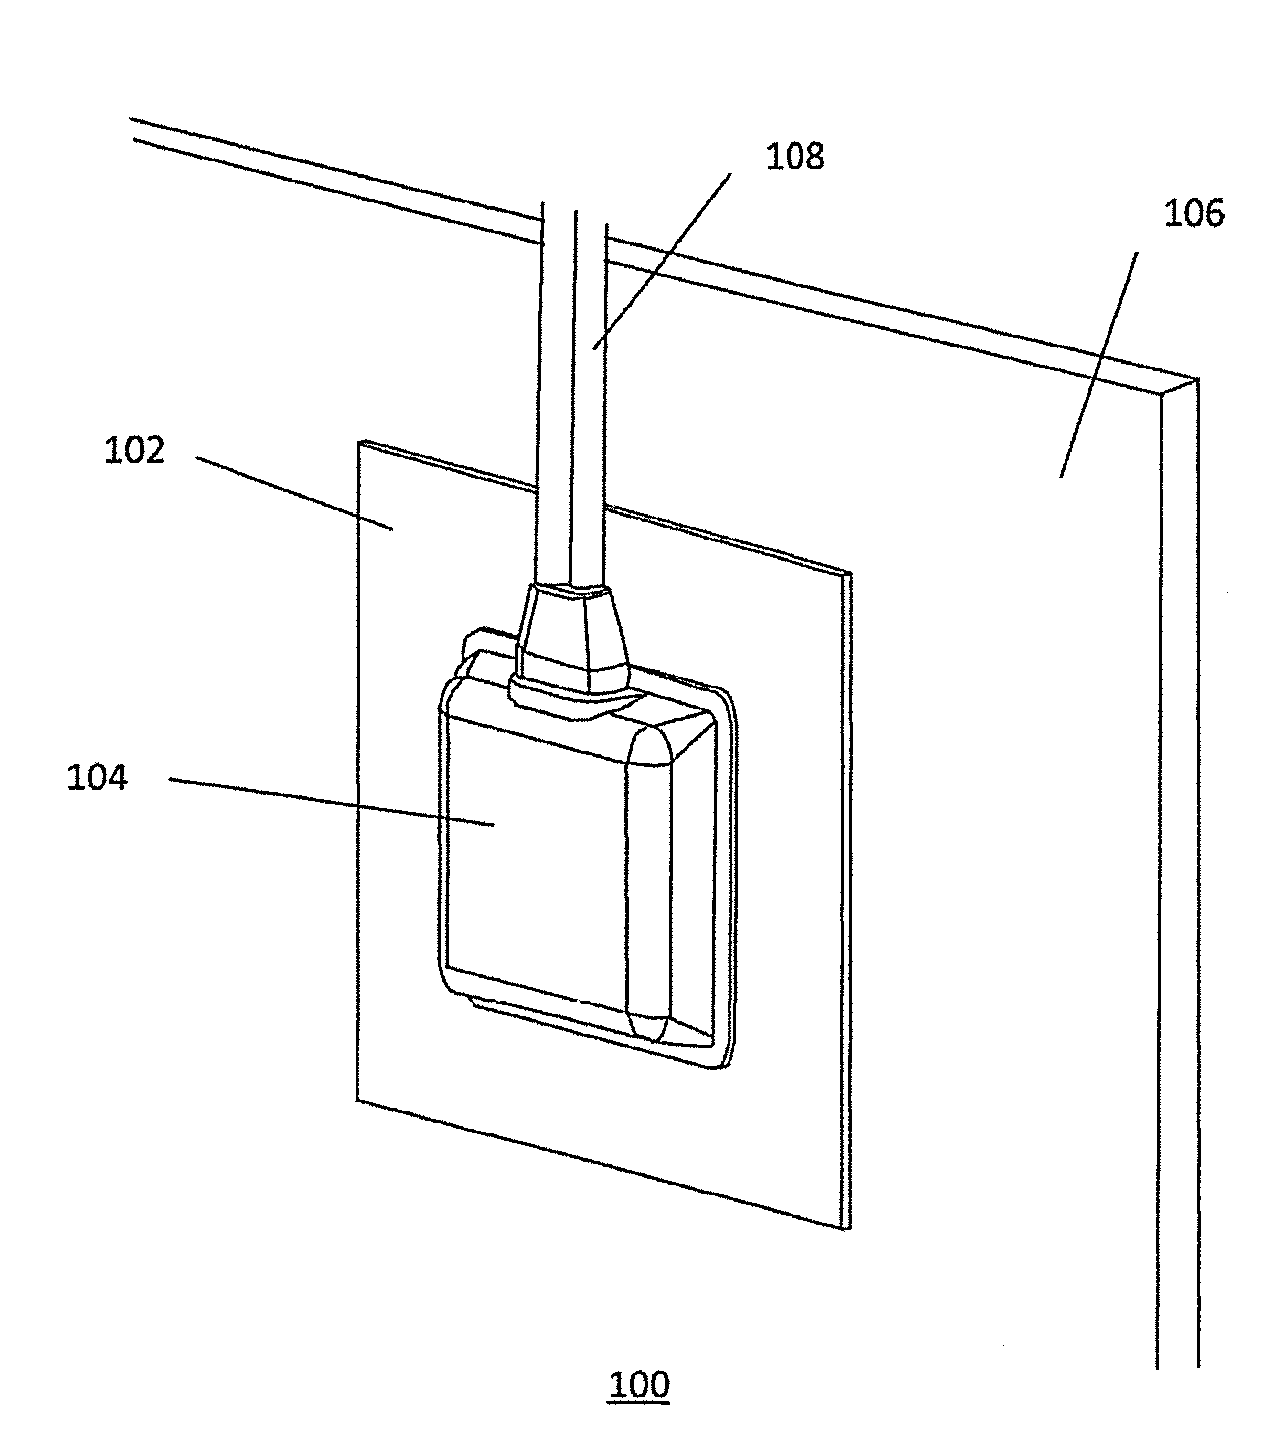 Thermally mounting electronics to a photovoltaic panel